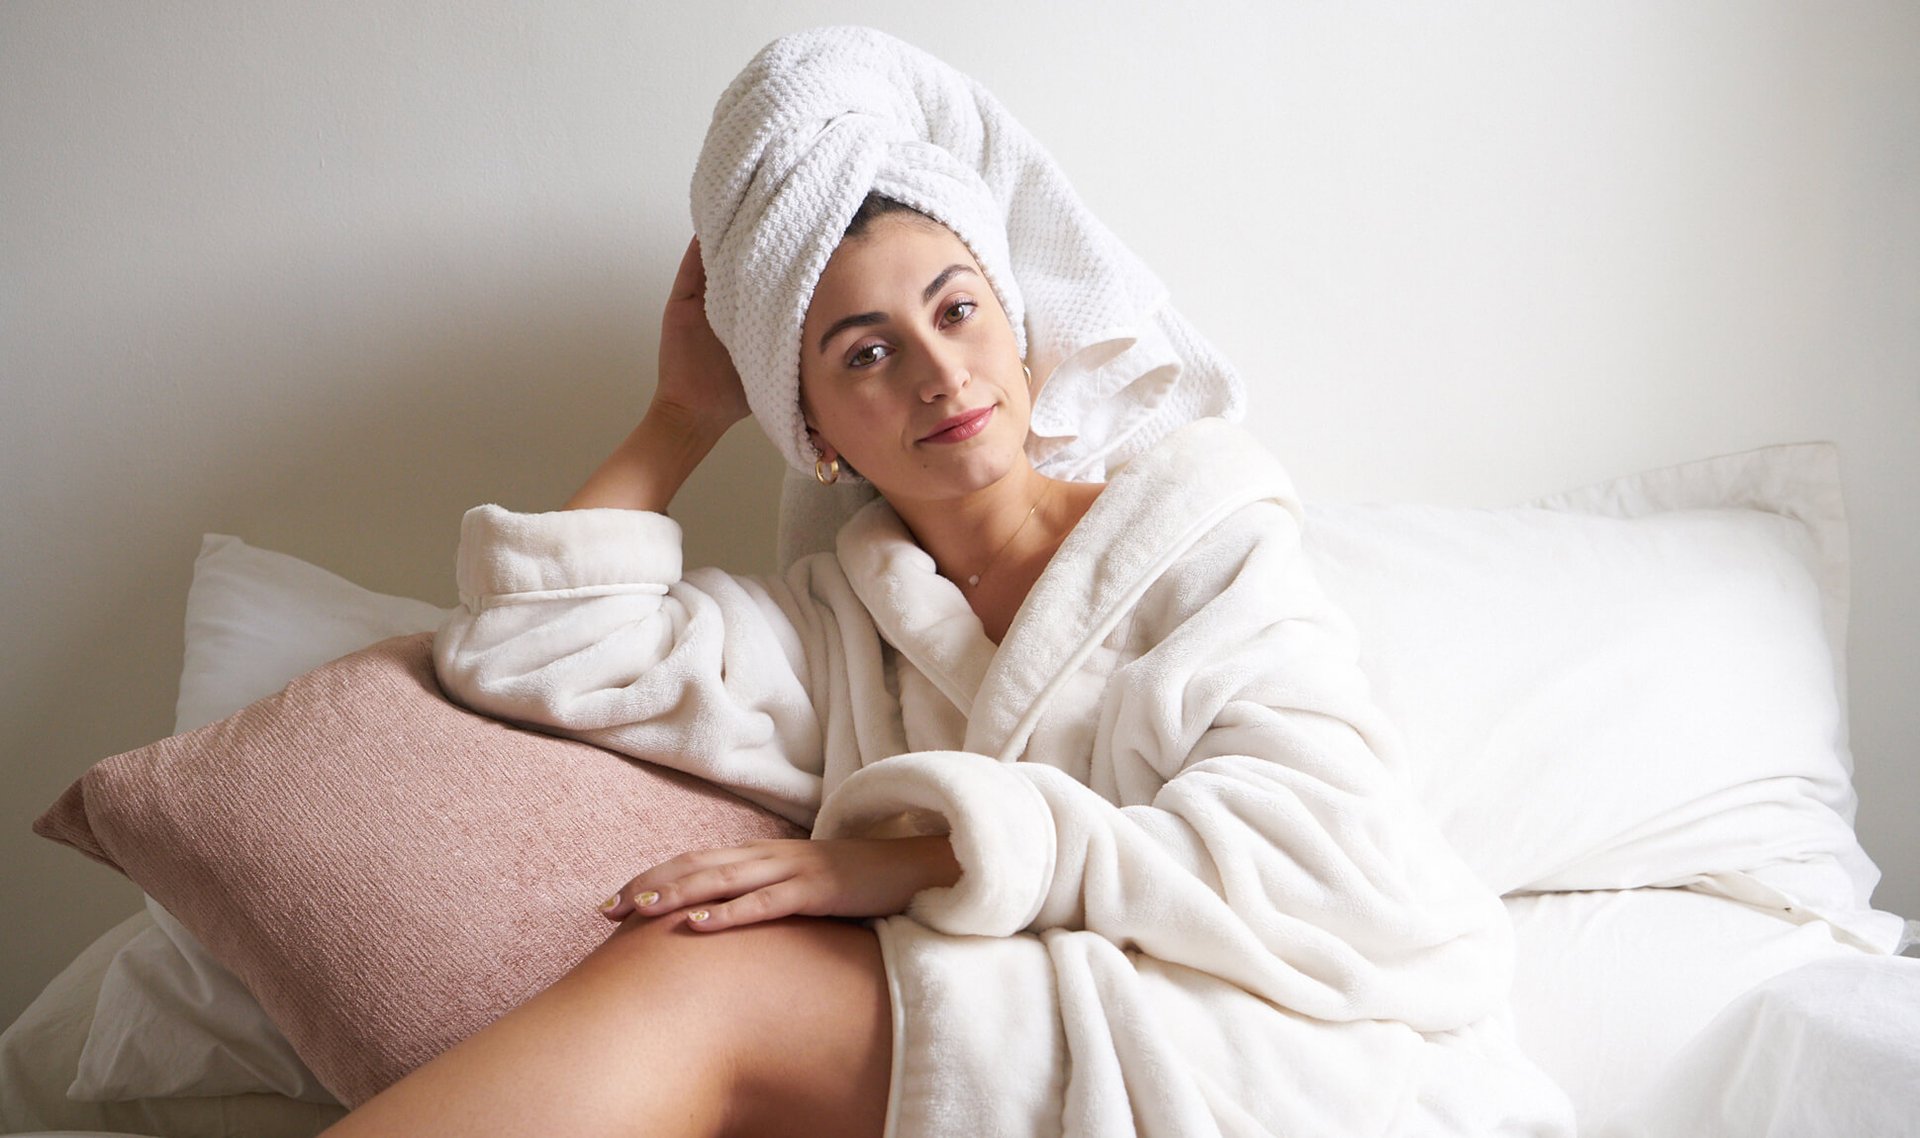 You’ve Never Seen a Nighttime Skin-Care Routine So Relaxing